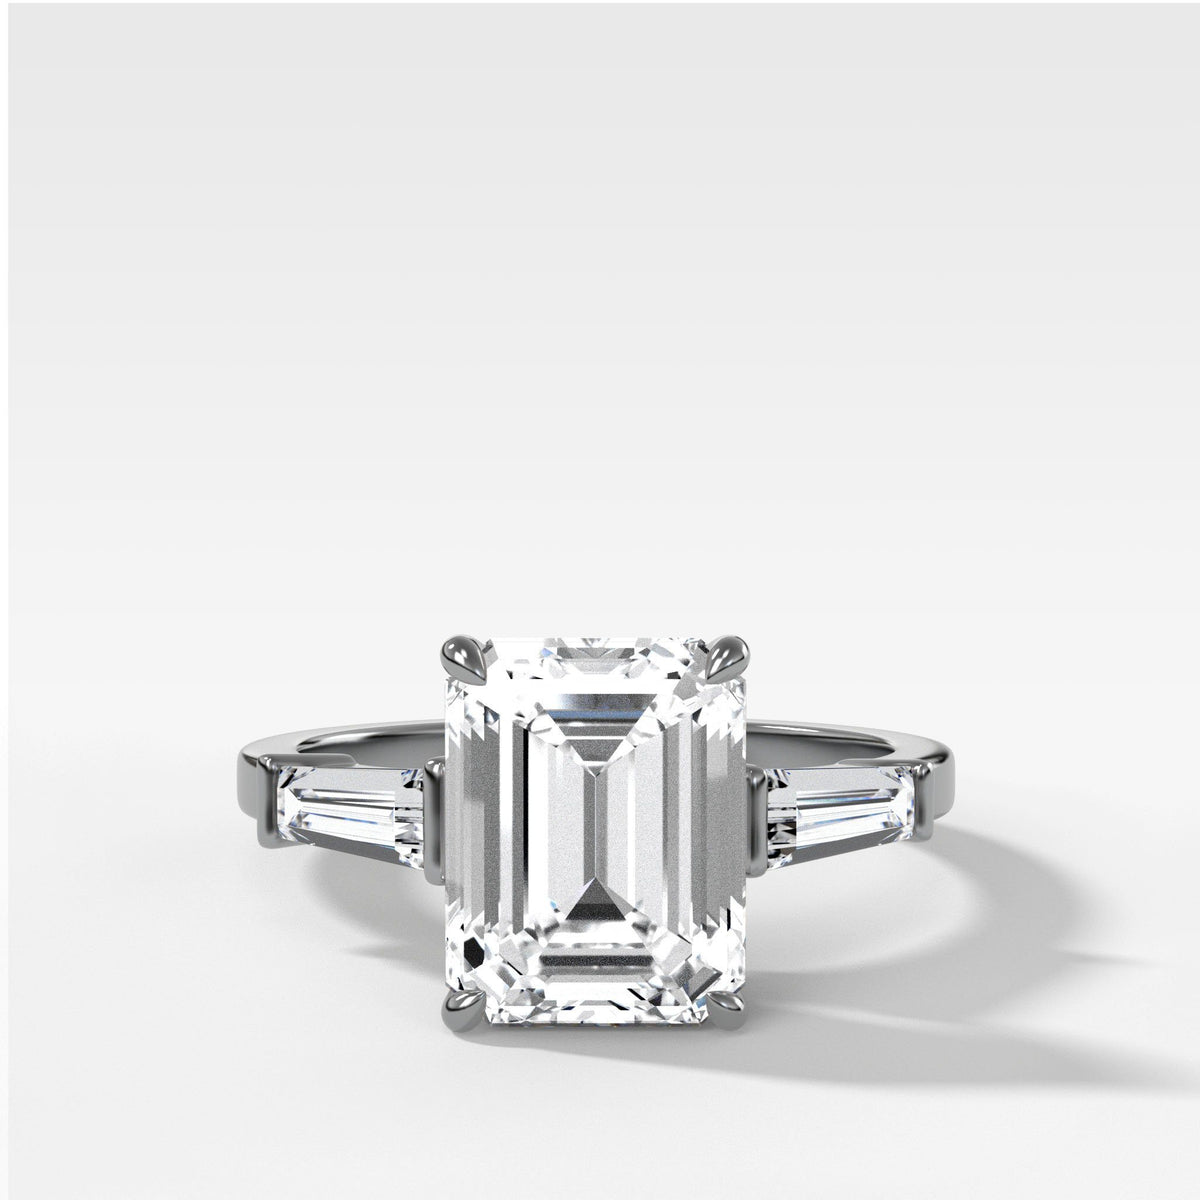 Baguette Diamond Rings | Article | Dianoche